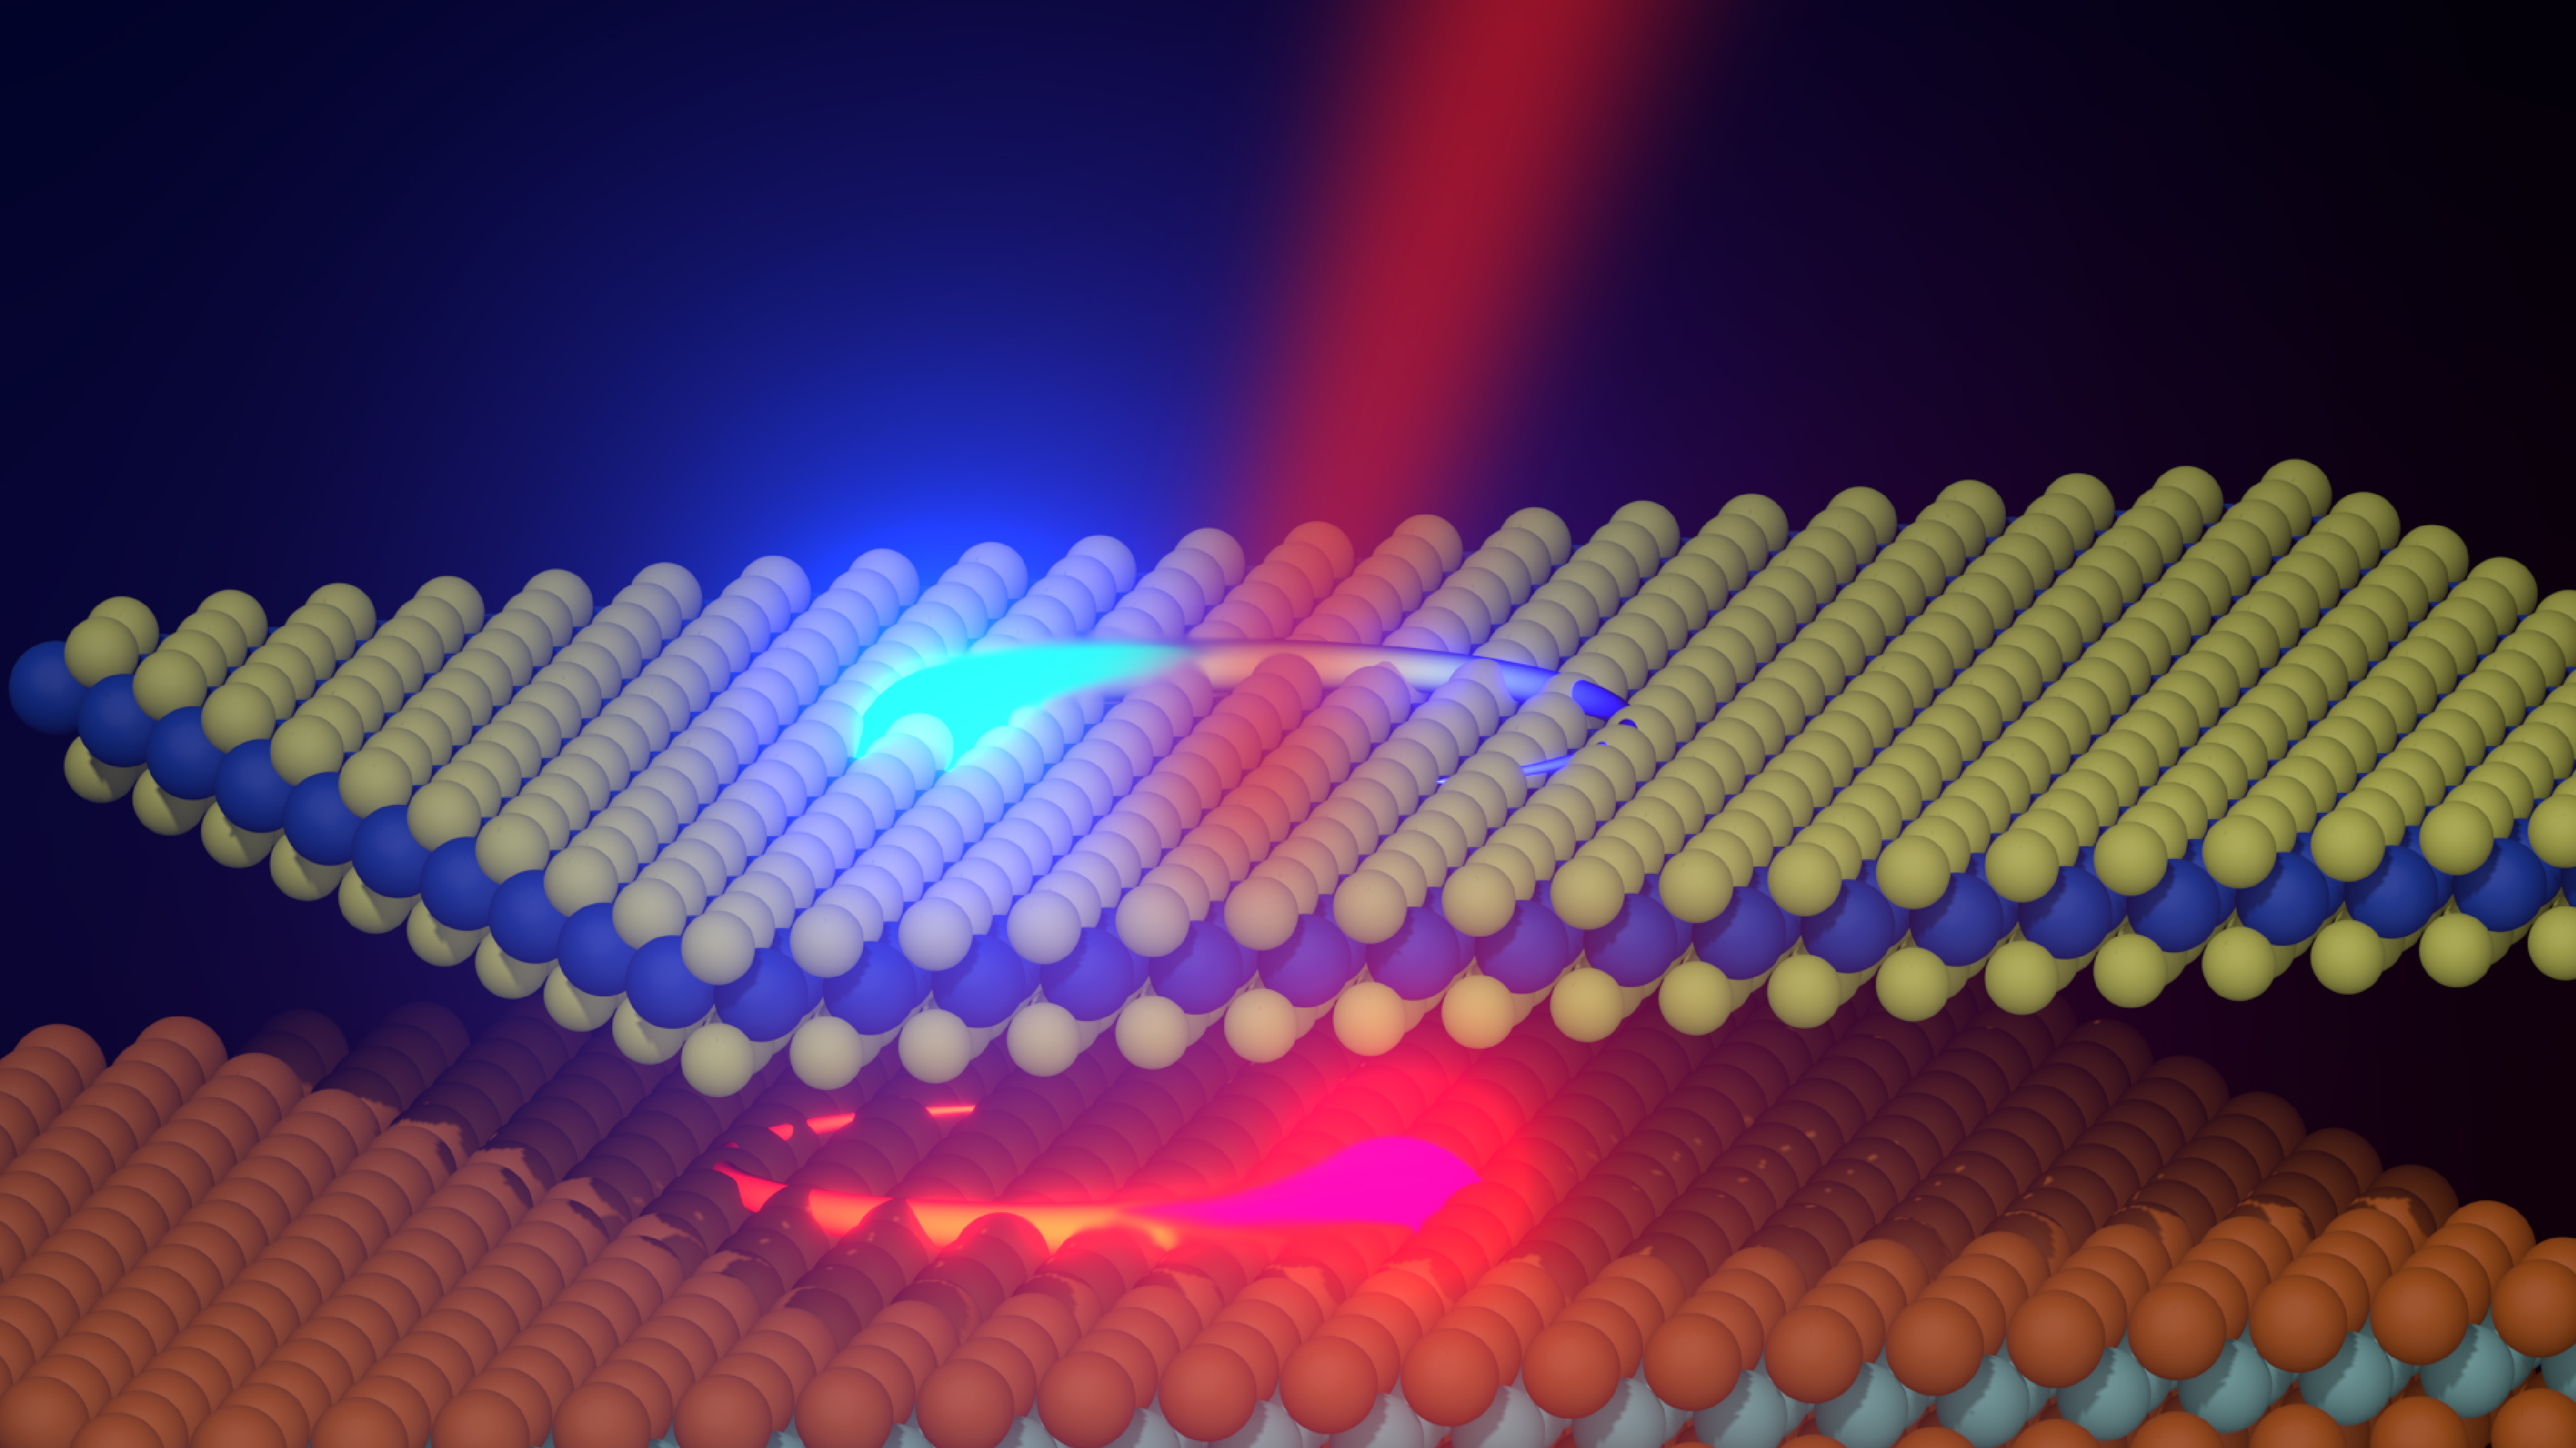 Excitons in atomically-thin layers